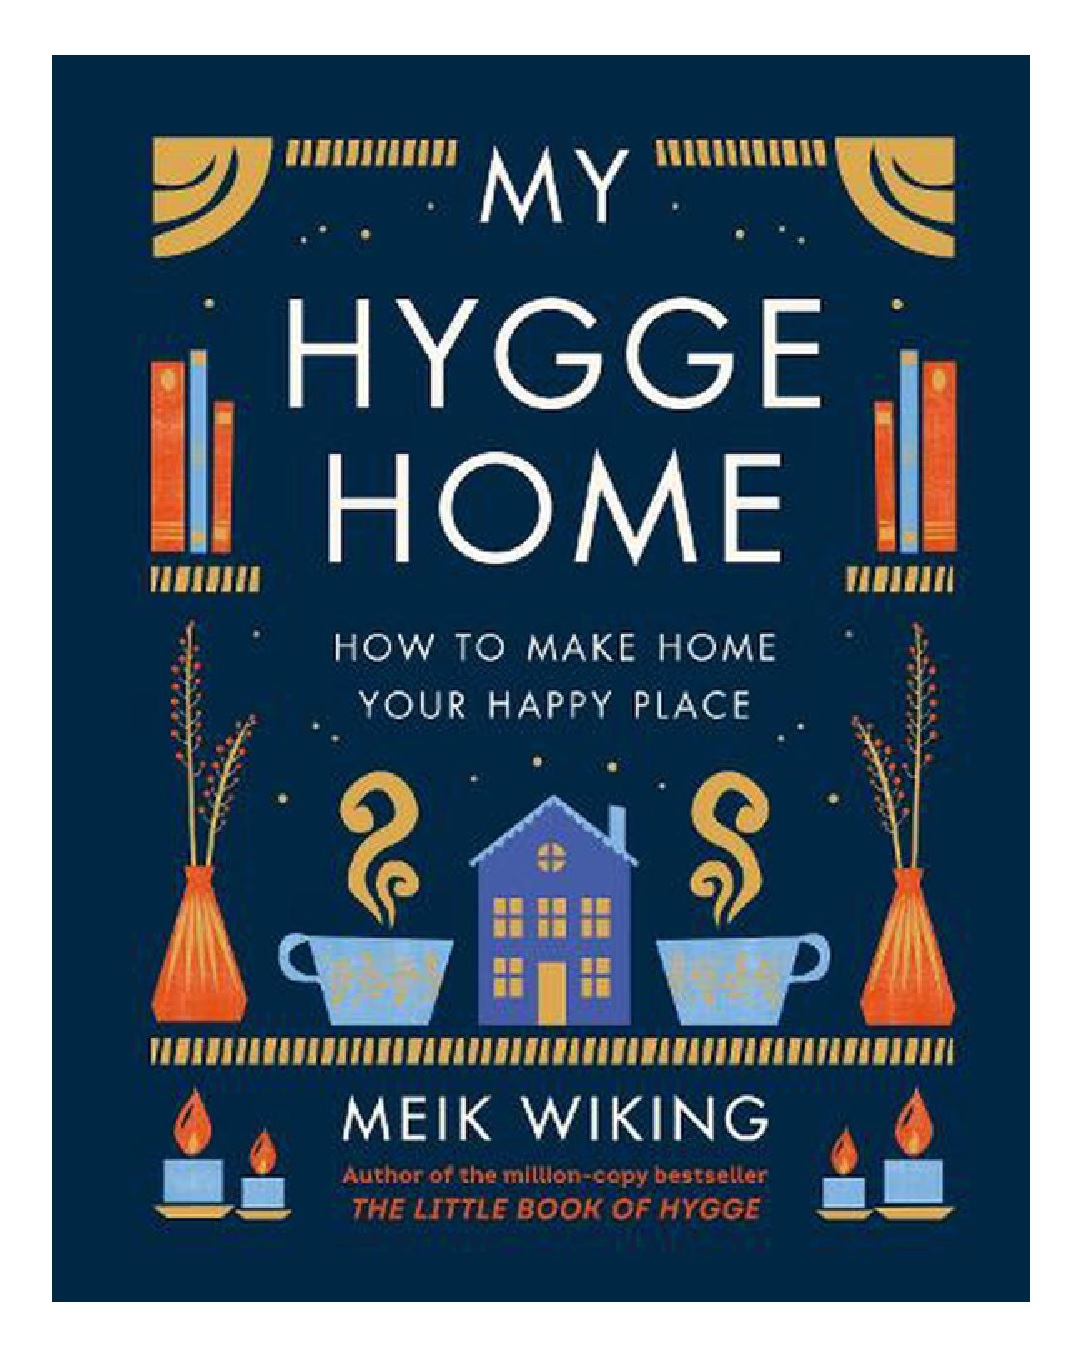 My Hygge home hardcover book